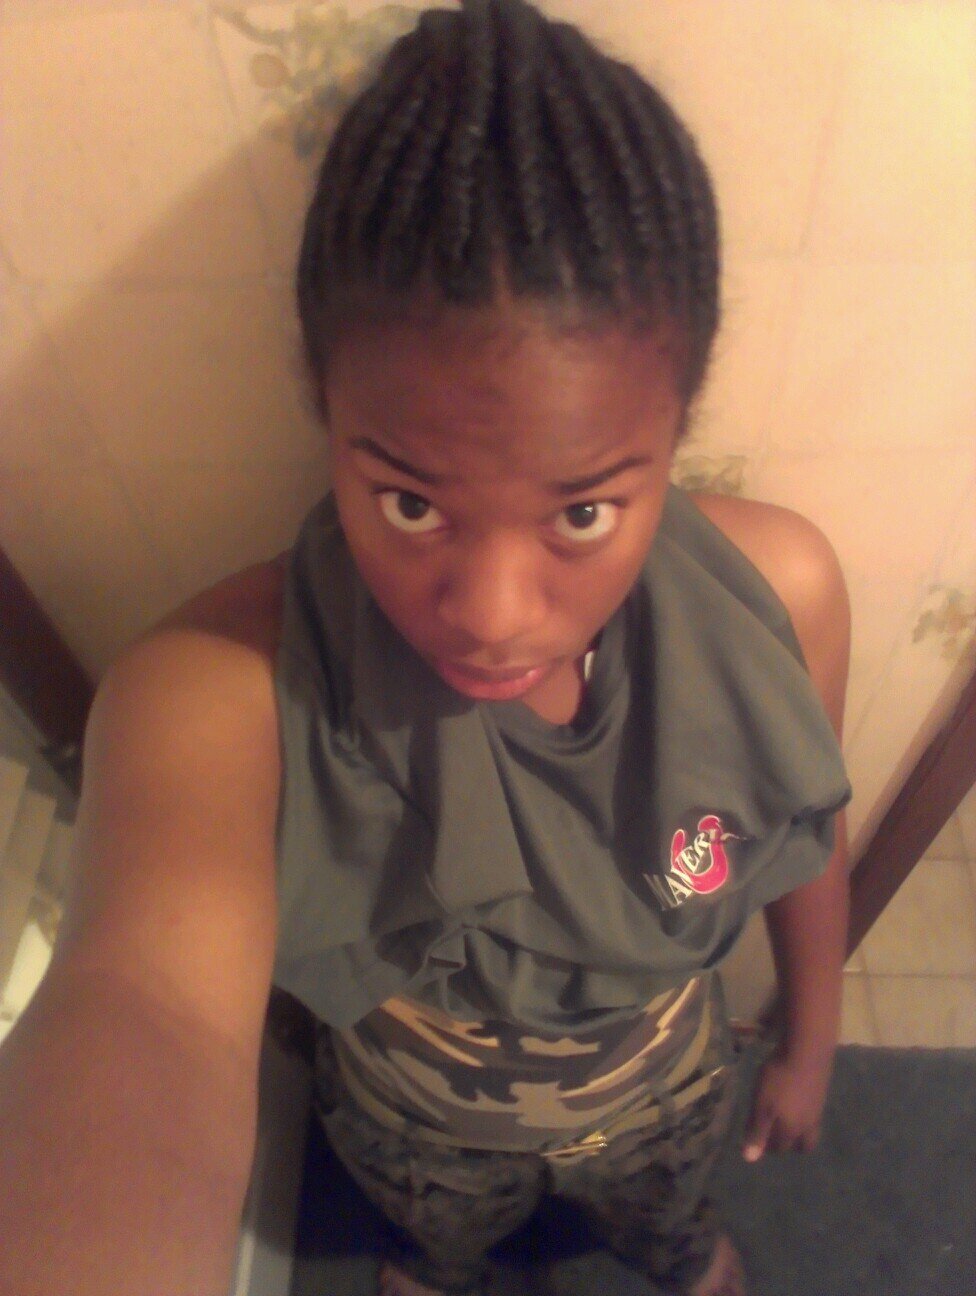 Just Loyal To My Team. Army Sister / Future Marine